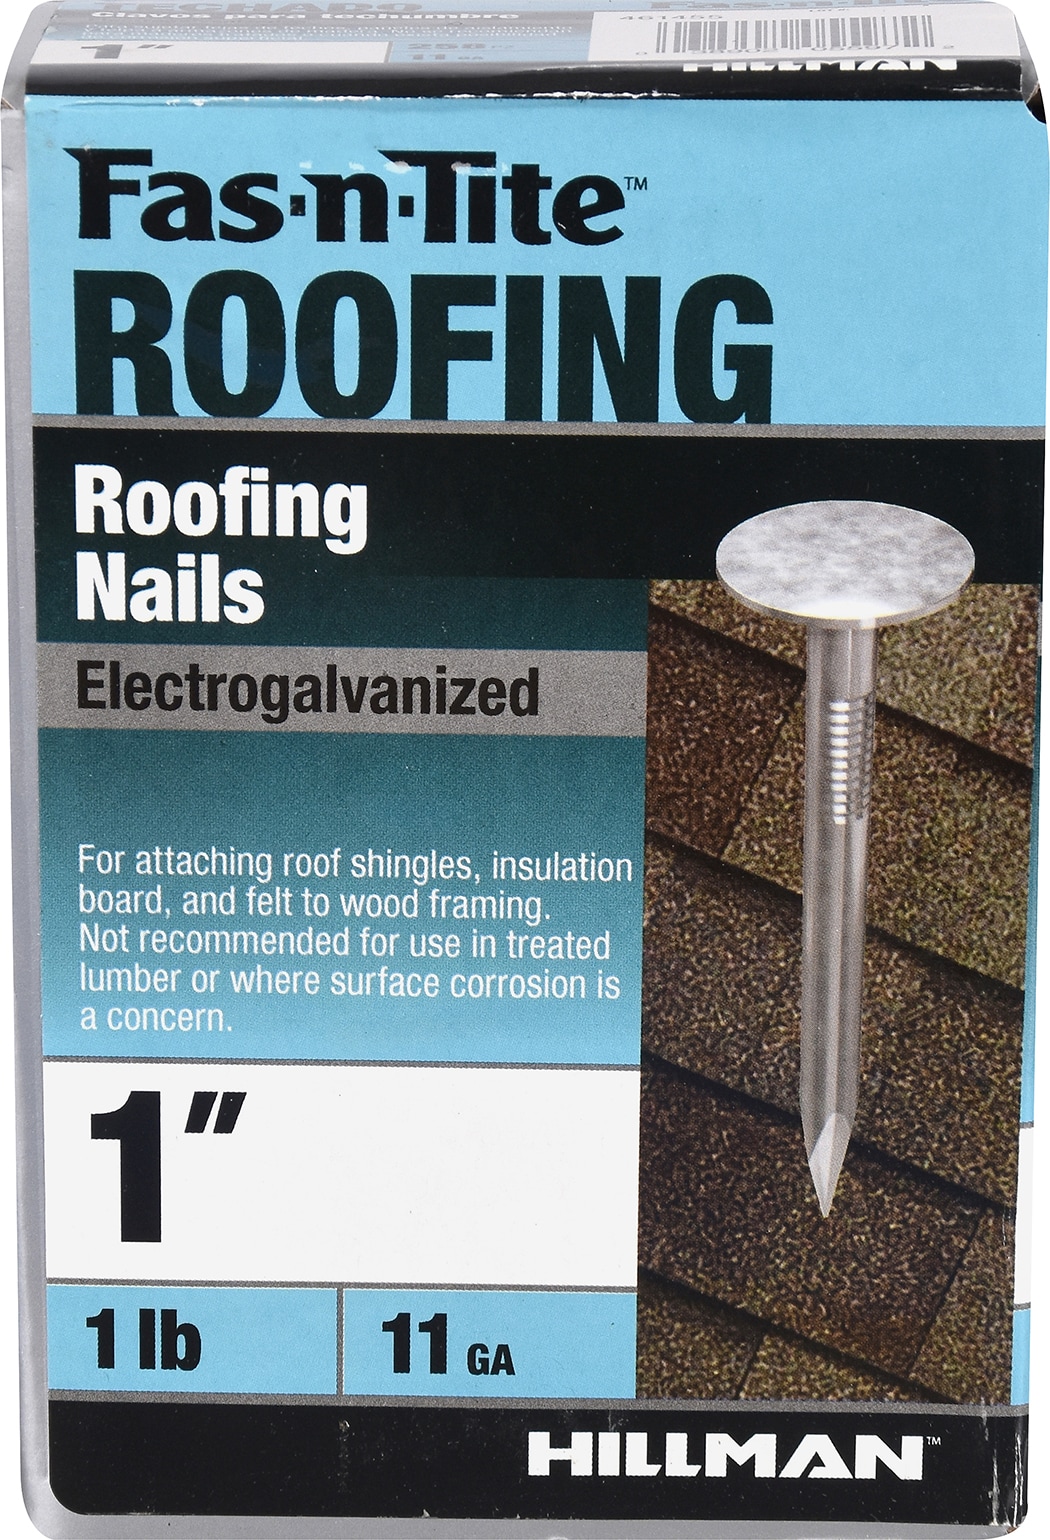 12+ Box Of Roofing Nails